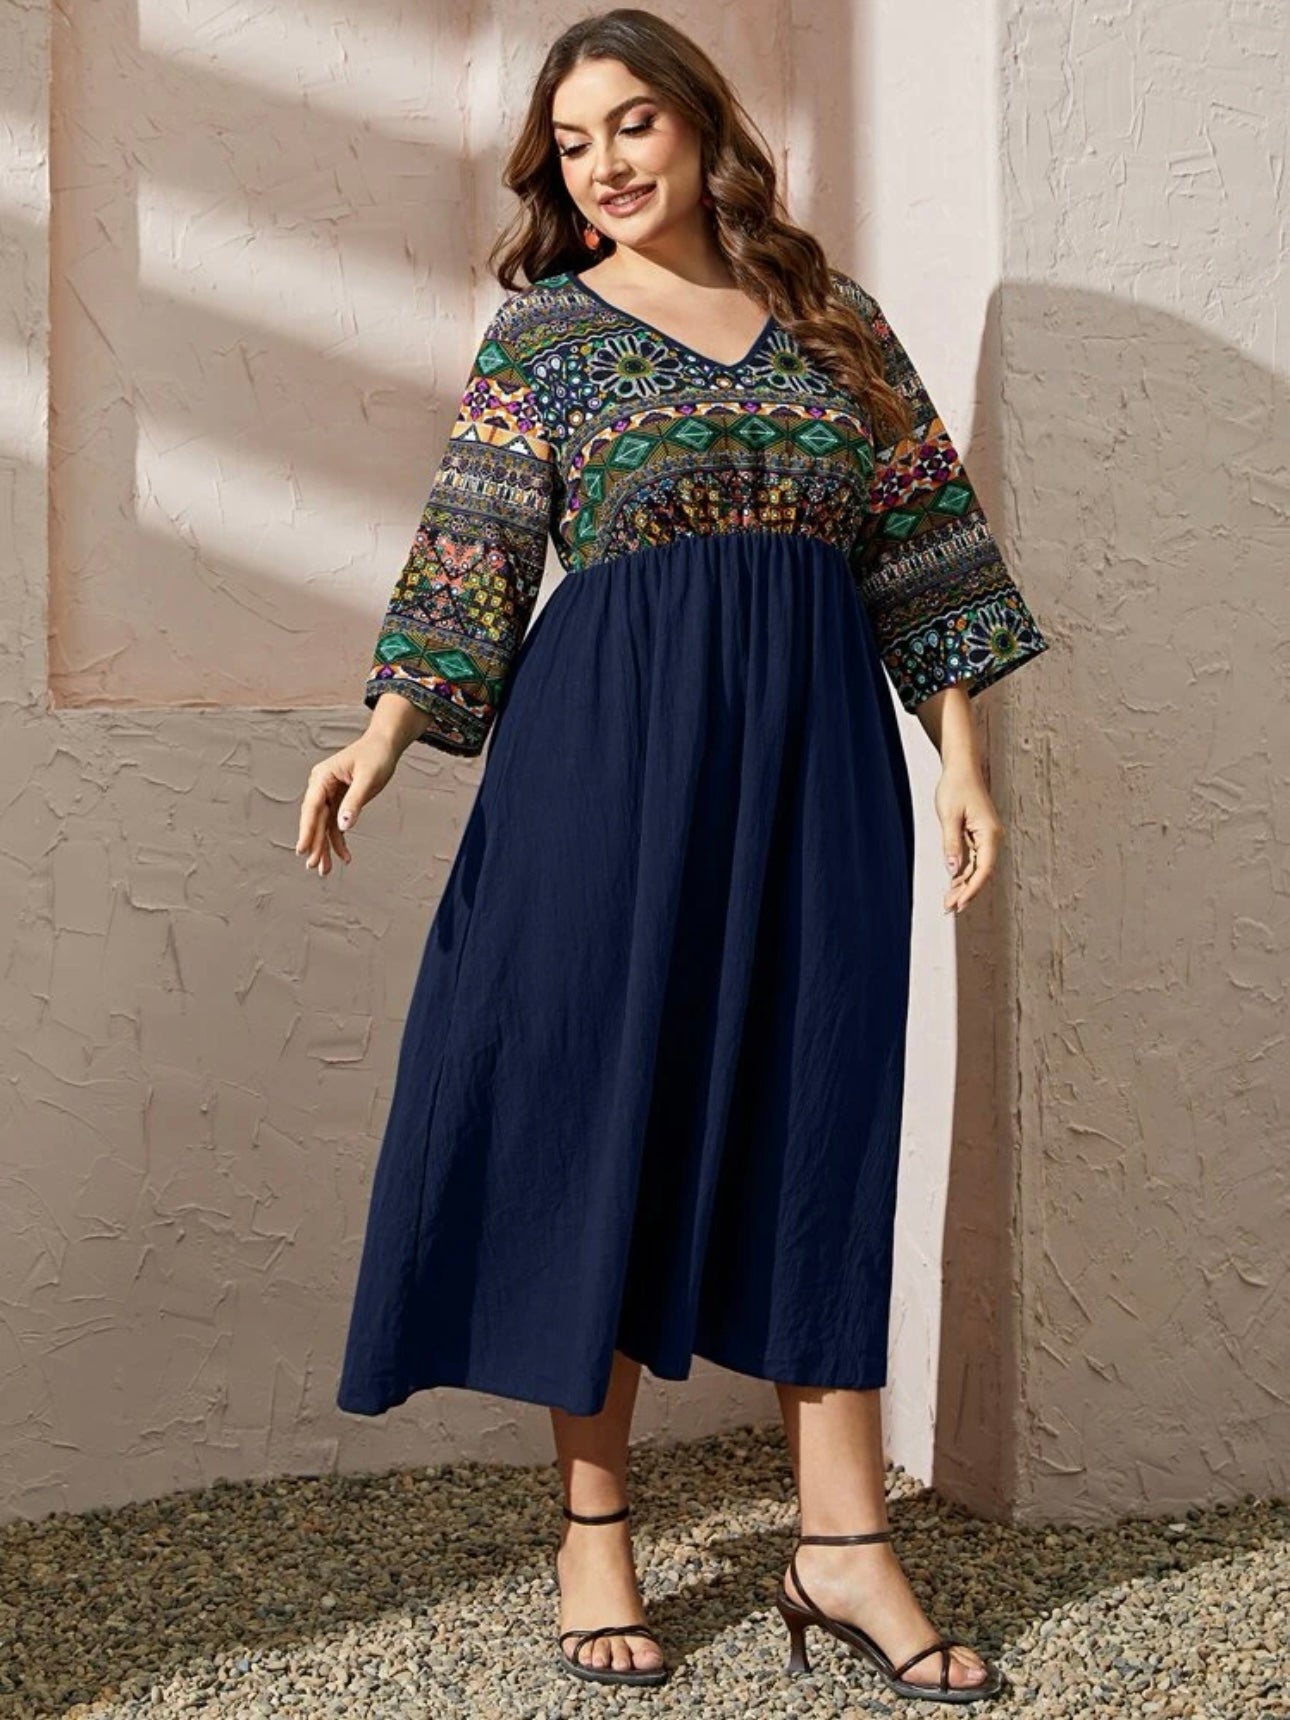 Long Sleeve V-neck Printed & Solid Combo Plus Size Dress